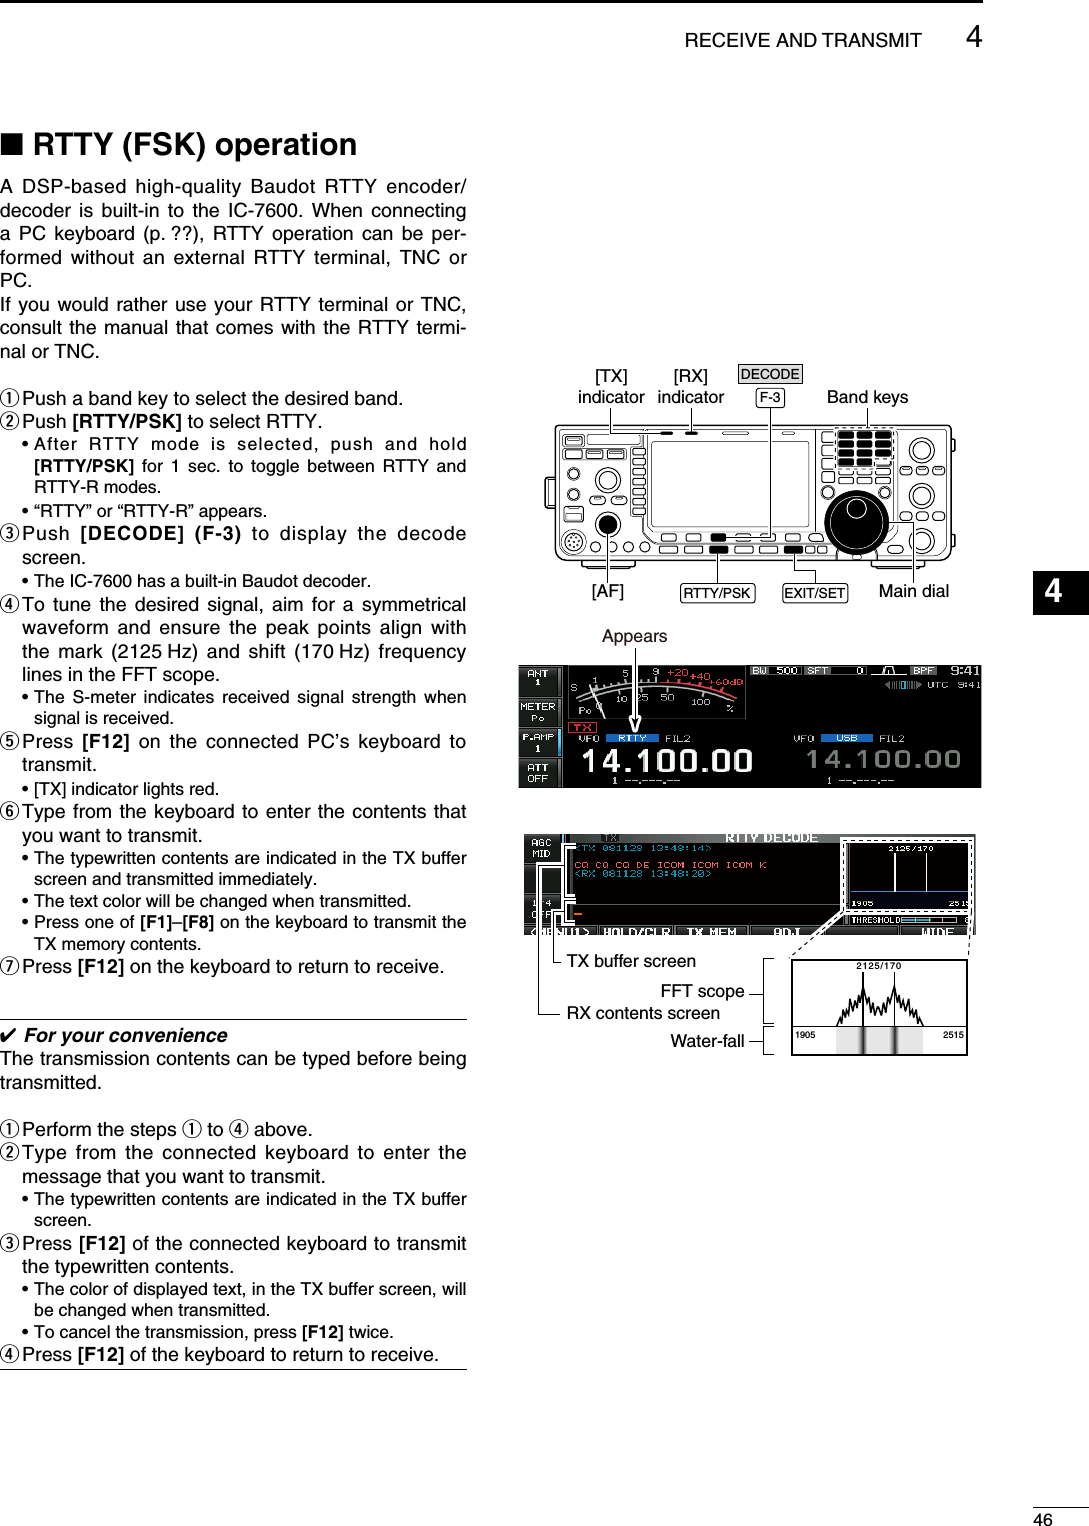 N RTTY (FSK) operationA DSP-based high-quality Baudot RTTY encoder/decoder is built-in to the IC-7600. When connecting a PC keyboard (p. ??), RTTY operation can be per-formed without an external RTTY terminal, TNC or PC.If you would rather use your RTTY terminal or TNC, consult the manual that comes with the RTTY termi-nal or TNC.q Push a band key to select the desired band.w Push  [RTTY/PSK] to select RTTY. •  After RTTY mode is selected, push and hold  [RTTY/PSK] for 1 sec. to toggle between RTTY and RTTY-R modes.  • “RTTY” or “RTTY-R” appears.e  Push  [DECODE] (F-3) to display the decode screen.  • The IC-7600 has a built-in Baudot decoder.r  To tune the desired signal, aim for a symmetrical waveform and ensure the peak points align with the mark (2125 Hz) and shift (170 Hz) frequency lines in the FFT scope.  •  The S-meter indicates received signal strength when signal is received.t  Press  [F12] on the connected PC’s keyboard to transmit.  • [TX] indicator lights red.y  Type from the keyboard to enter the contents that you want to transmit. •  The typewritten contents are indicated in the TX buffer screen and transmitted immediately.  • The text color will be changed when transmitted.  •  Press one of [F1]–[F8] on the keyboard to transmit the TX memory contents.u Press  [F12] on the keyboard to return to receive. For your convenienceThe transmission contents can be typed before being transmitted.q Perform the steps q to r above.w  Type from the connected keyboard to enter the message that you want to transmit. •  The typewritten contents are indicated in the TX buffer screen.e  Press [F12] of the connected keyboard to transmit the typewritten contents. •  The color of displayed text, in the TX buffer screen, will be changed when transmitted.   • To cancel the transmission, press [F12] twice.r Press  [F12] of the keyboard to return to receive.Main dialEXIT/SETF-3[TX]indicator[RX]indicator[AF]Band keysRTTY/PSKDECODEAppears2125/1701905 2515FFT scopeTX buffer screenRX contents screenWater-fall464RECEIVE AND TRANSMIT123456789101112131415161718192021